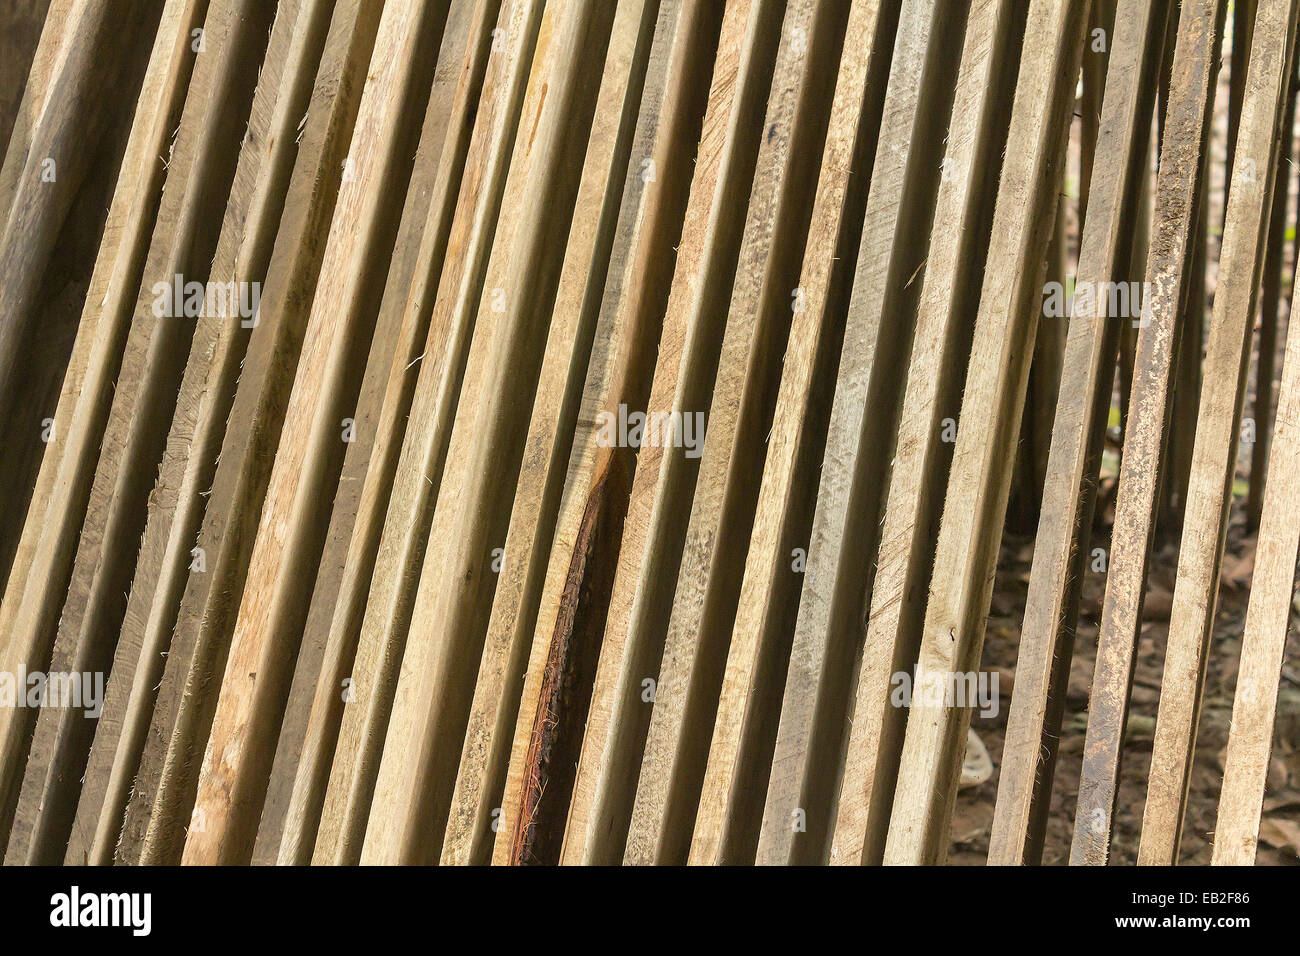 Unprocessed pine boards drying Stock Photo